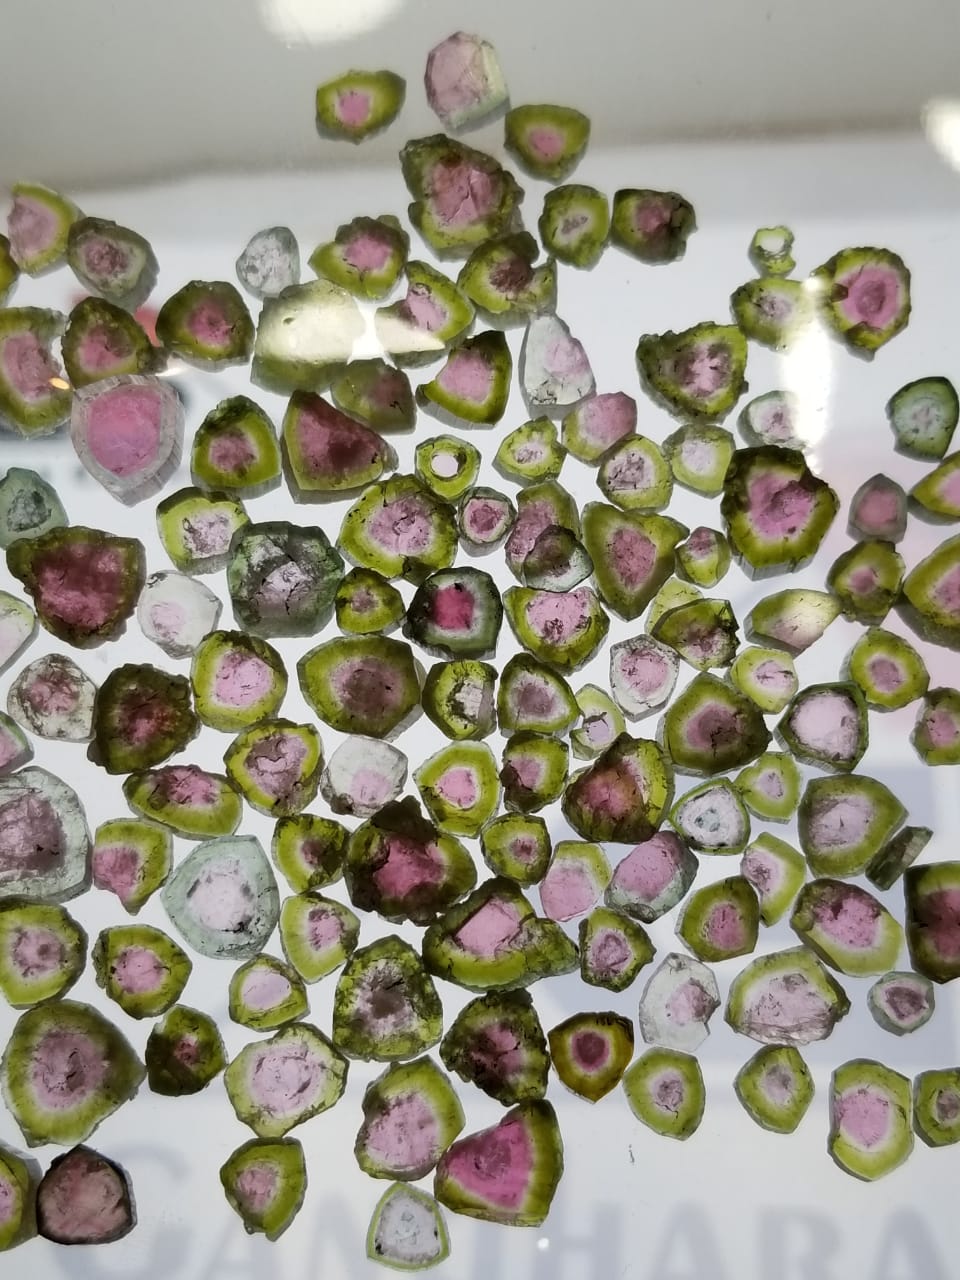 Watermelon tourmaline slices lot available for sale